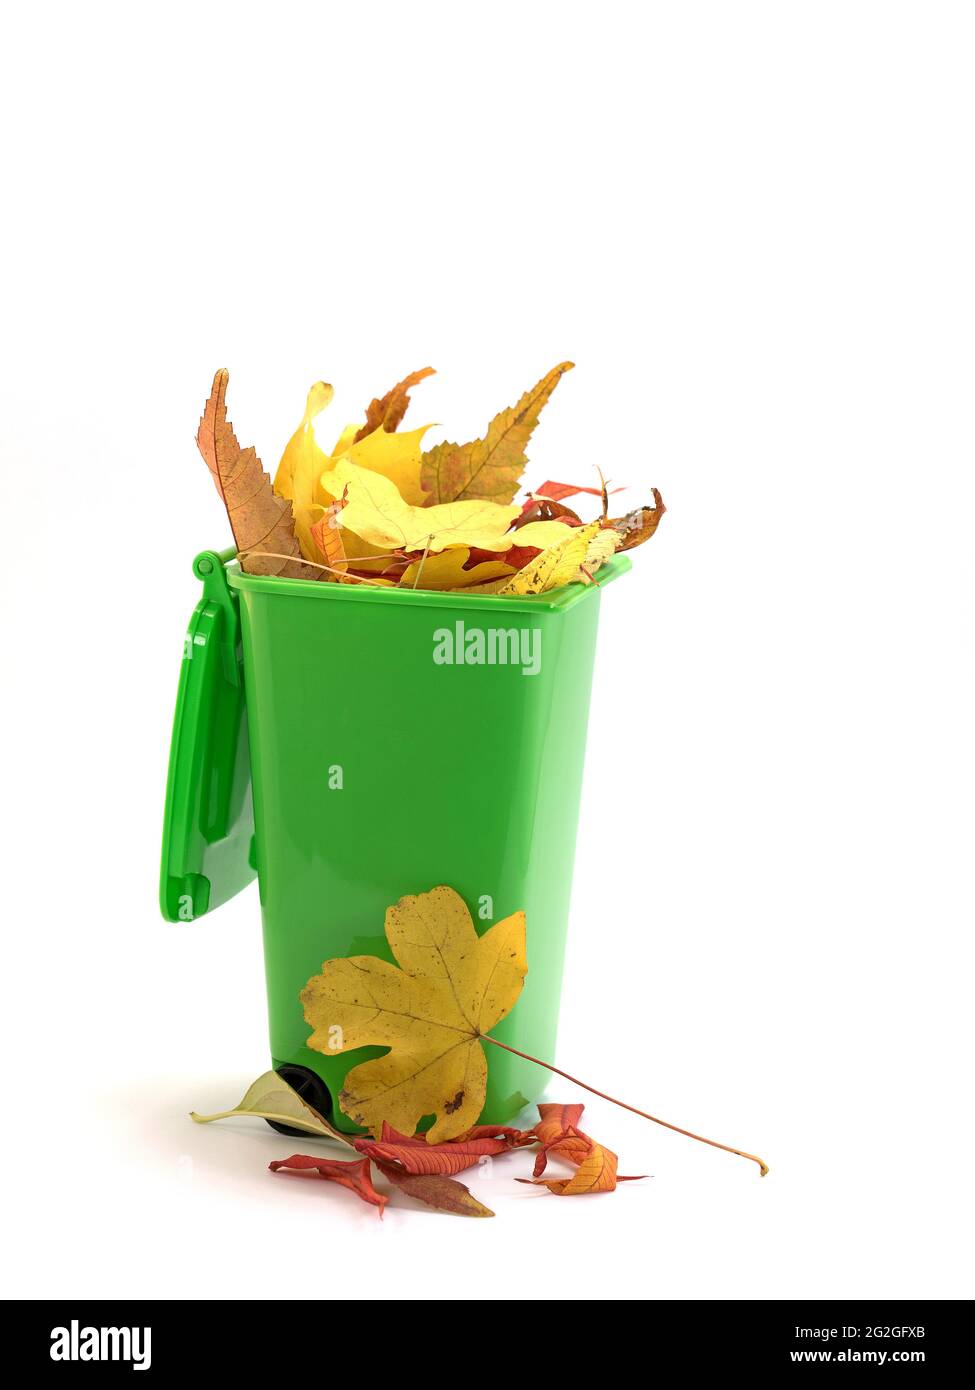 Garbage bin filled with leaves against white background Stock Photo